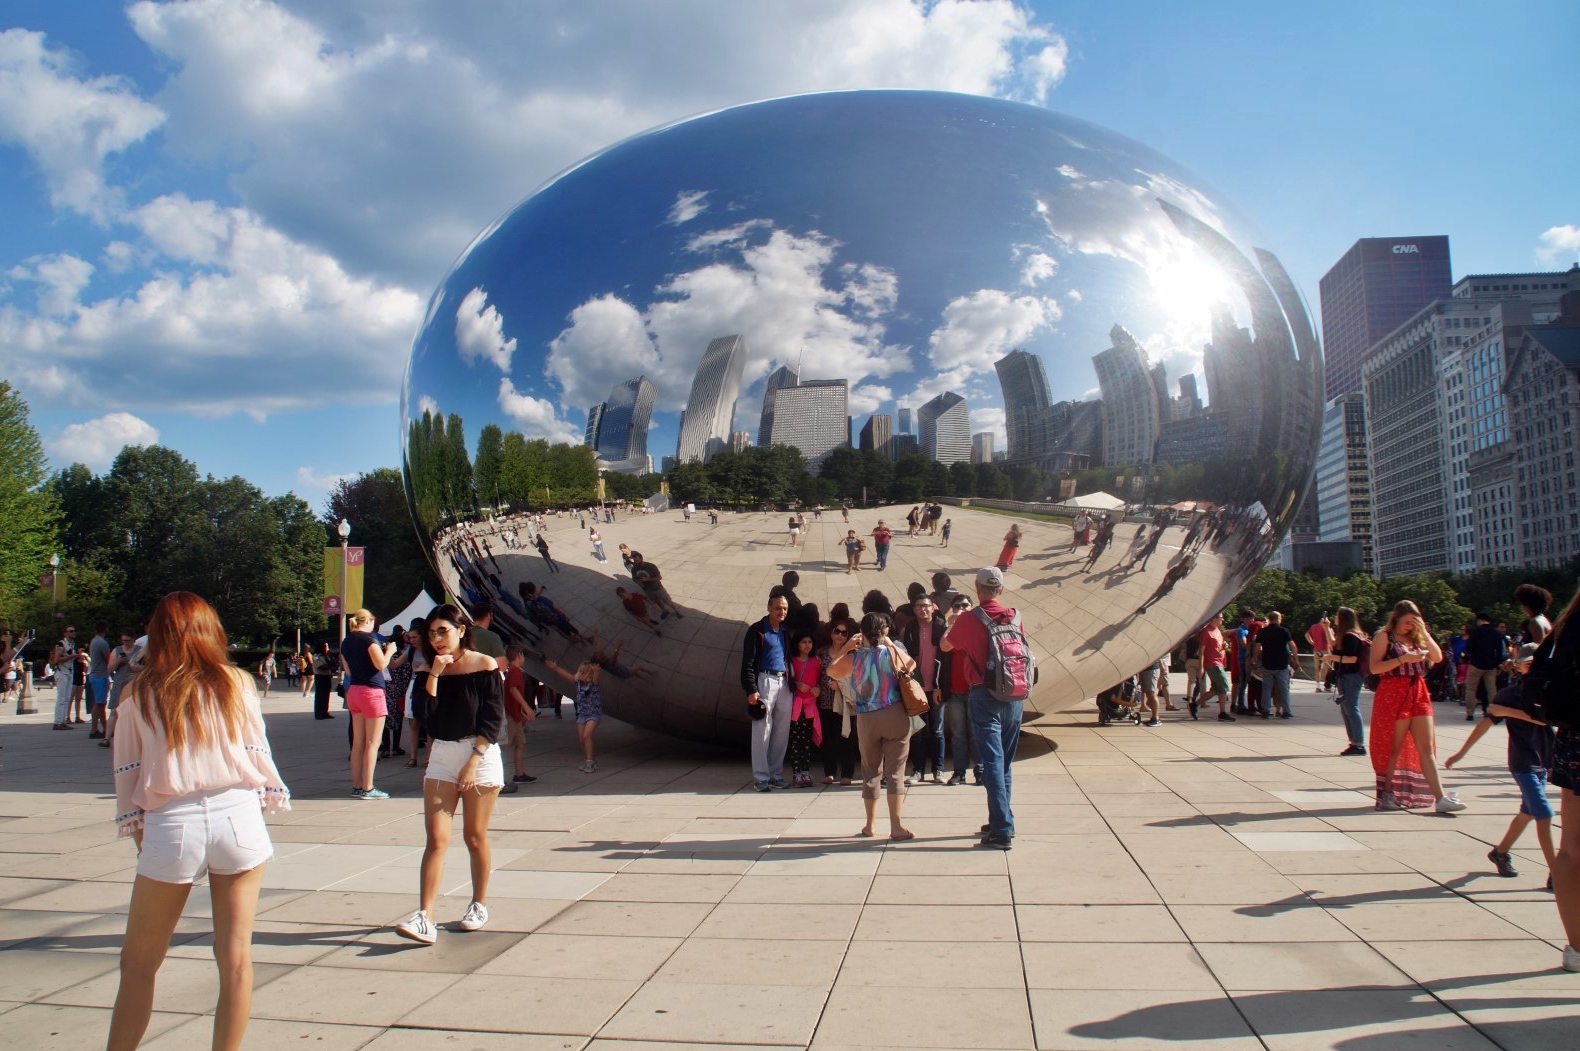 "The Bean" - A famous landmark in Chicago.